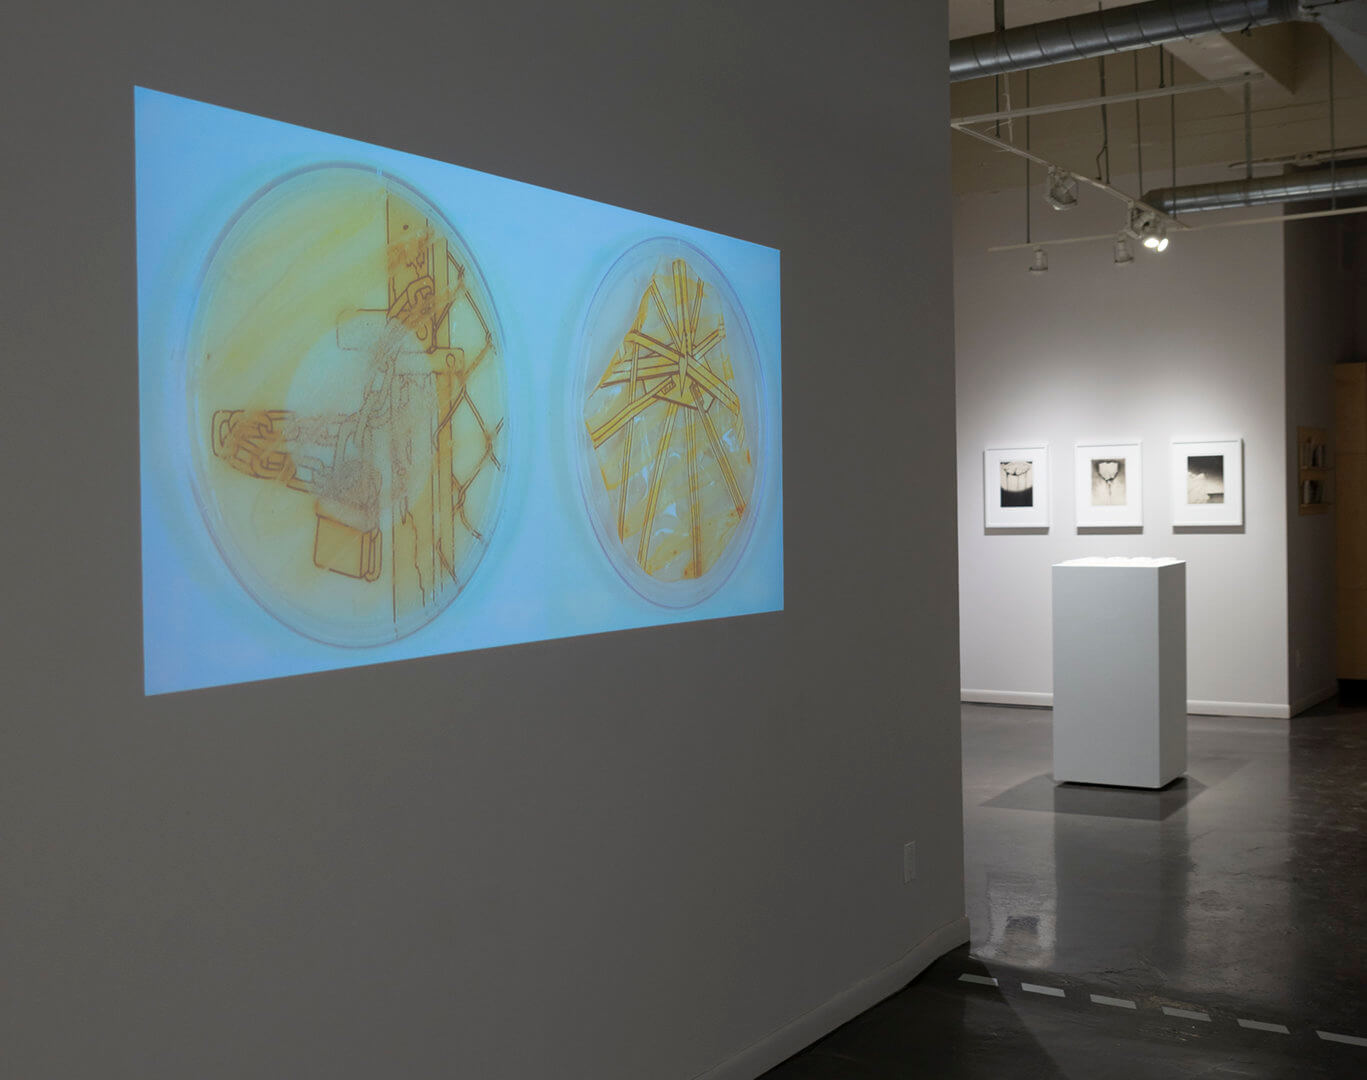 Installation view of Inversion. Video: Retrograde by Jill Ho-You. Two-channel time lapse. 2019. Image credit: Sarah Fuller.